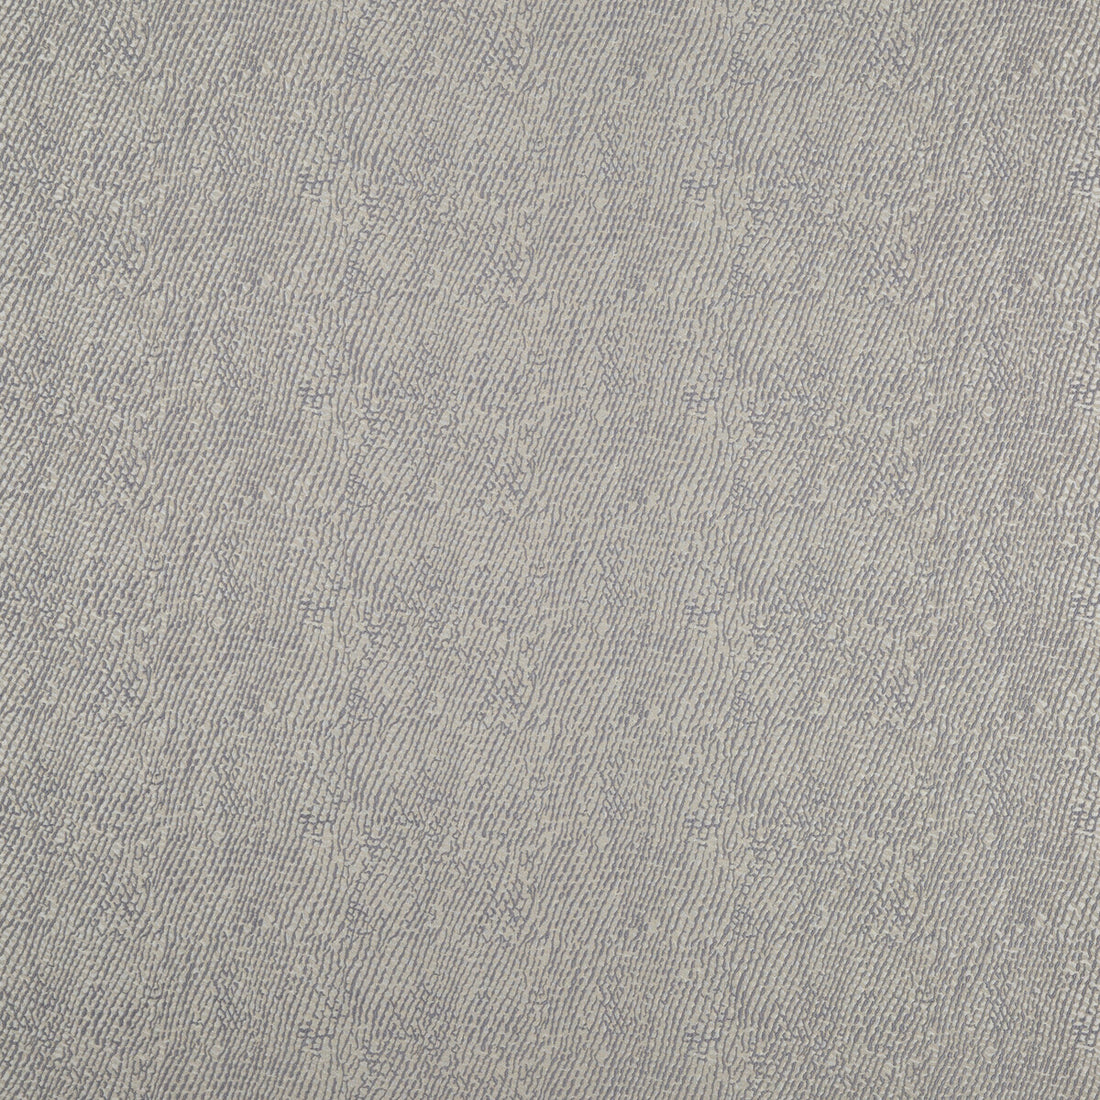 Galaxy fabric in platinum/slate color - pattern ED85224.1.0 - by Threads in the Odyssey collection